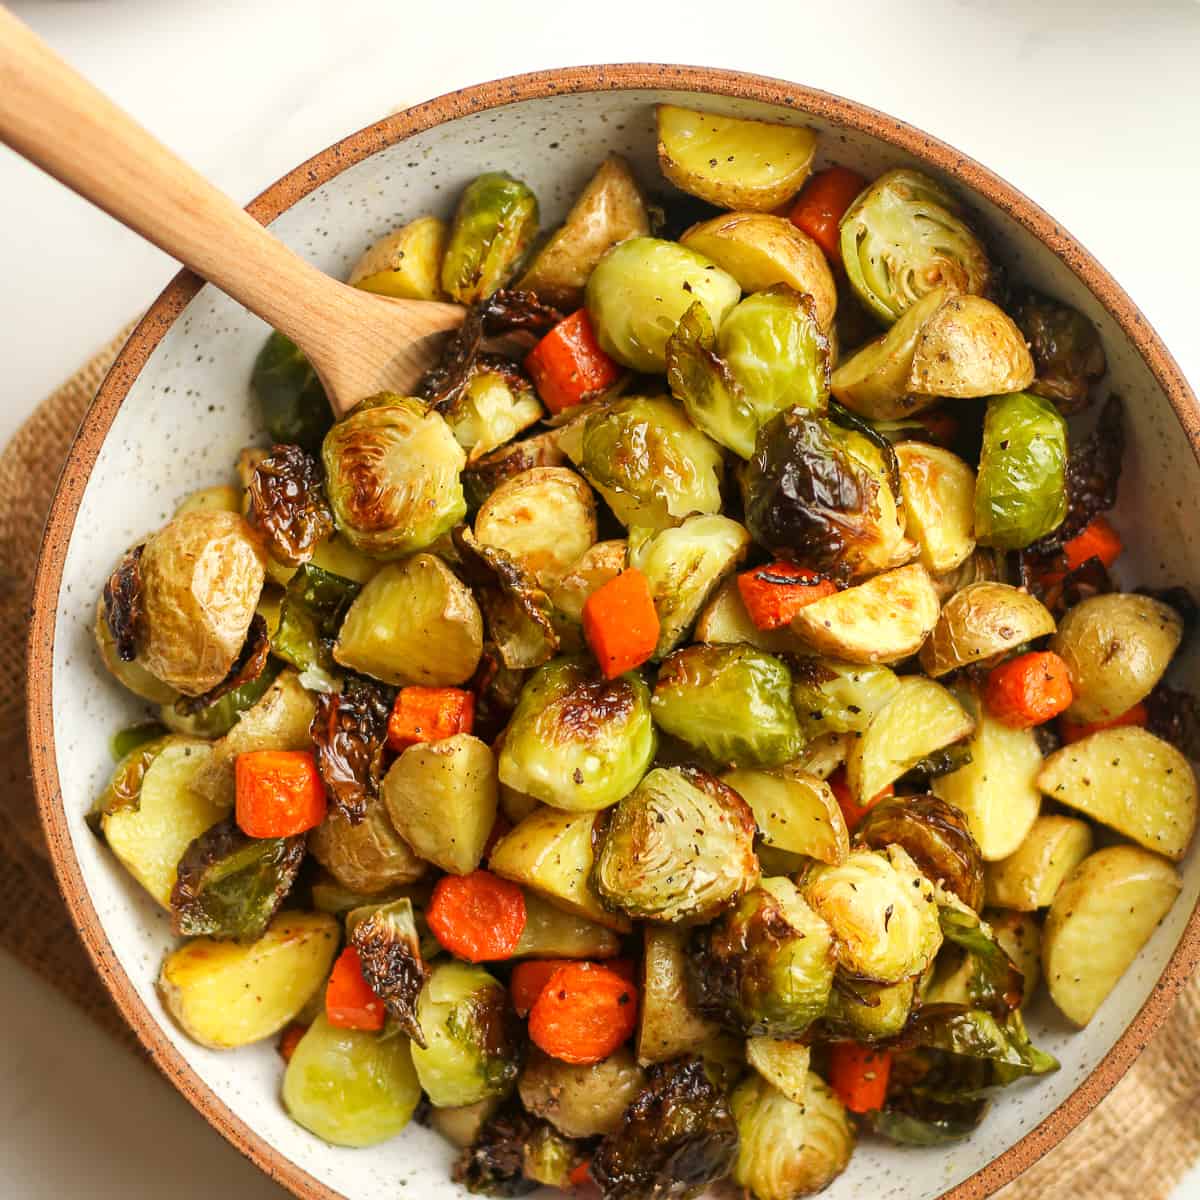 Roasted Potatoes, Carrots, and Brussels Sprouts - SueBee Homemaker